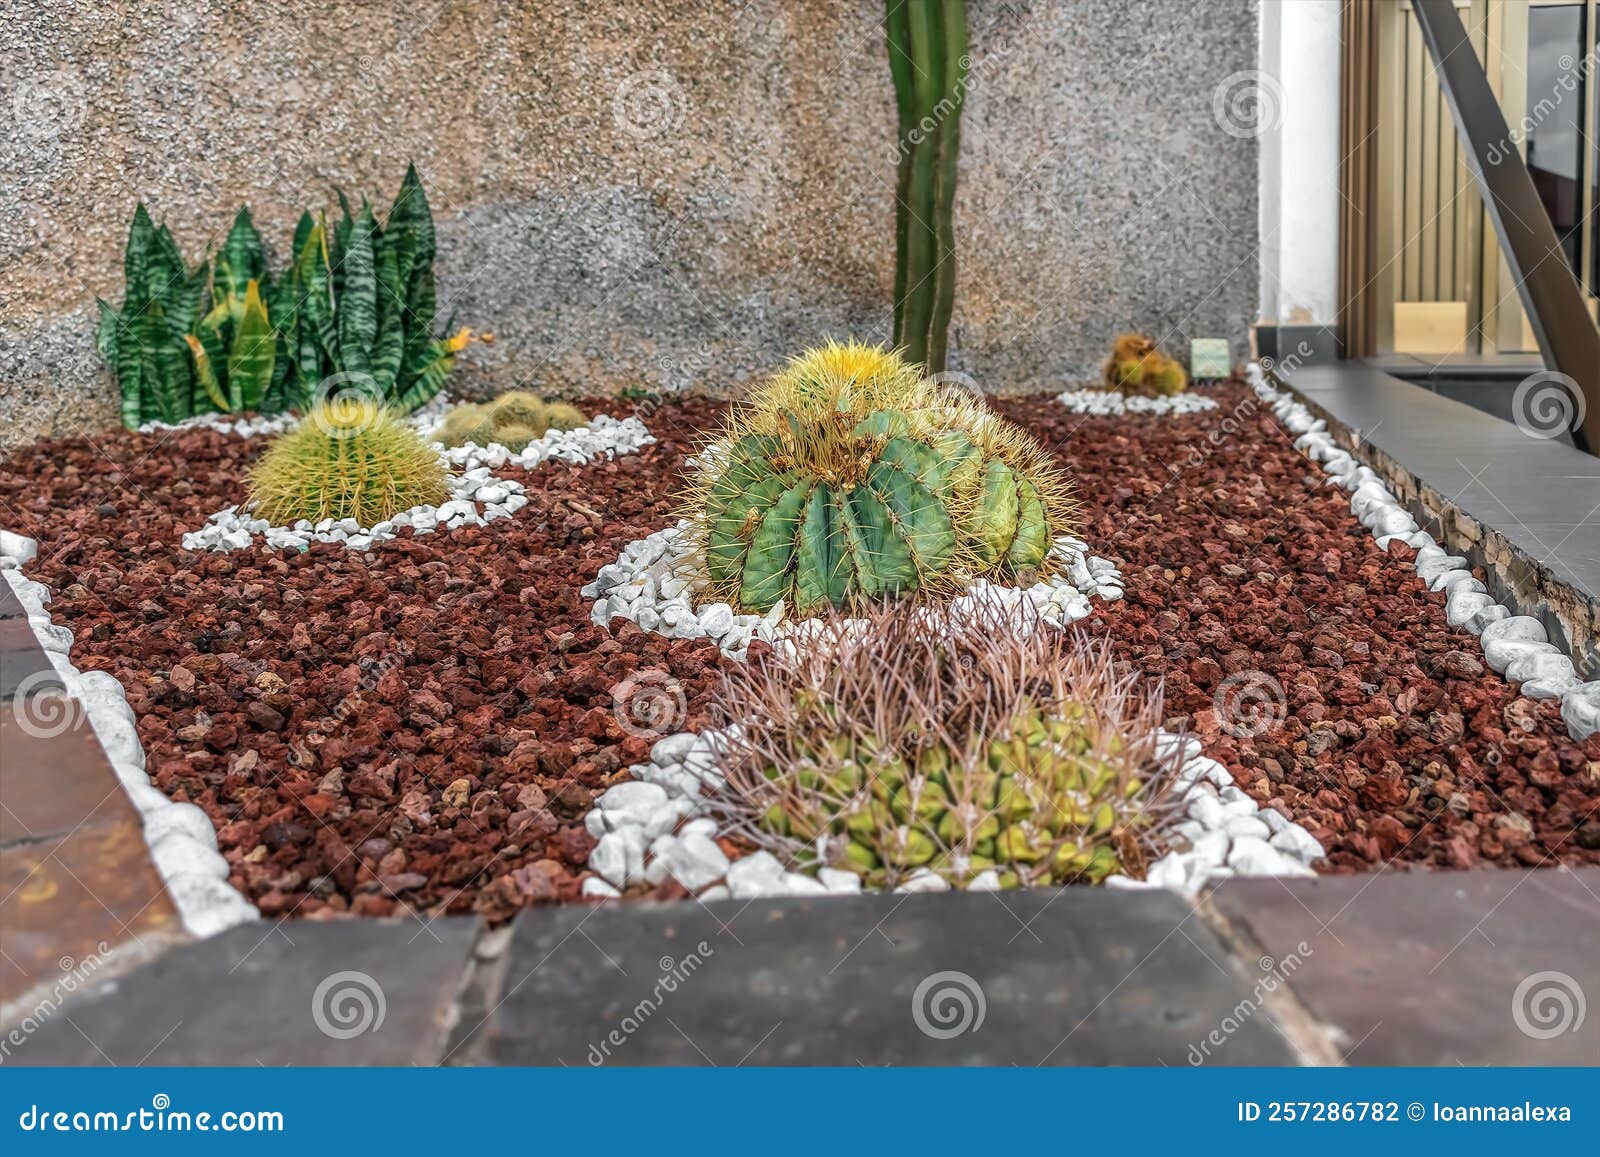 Decorative Flowerbed with Different Cacti Growing among Volcanic ...